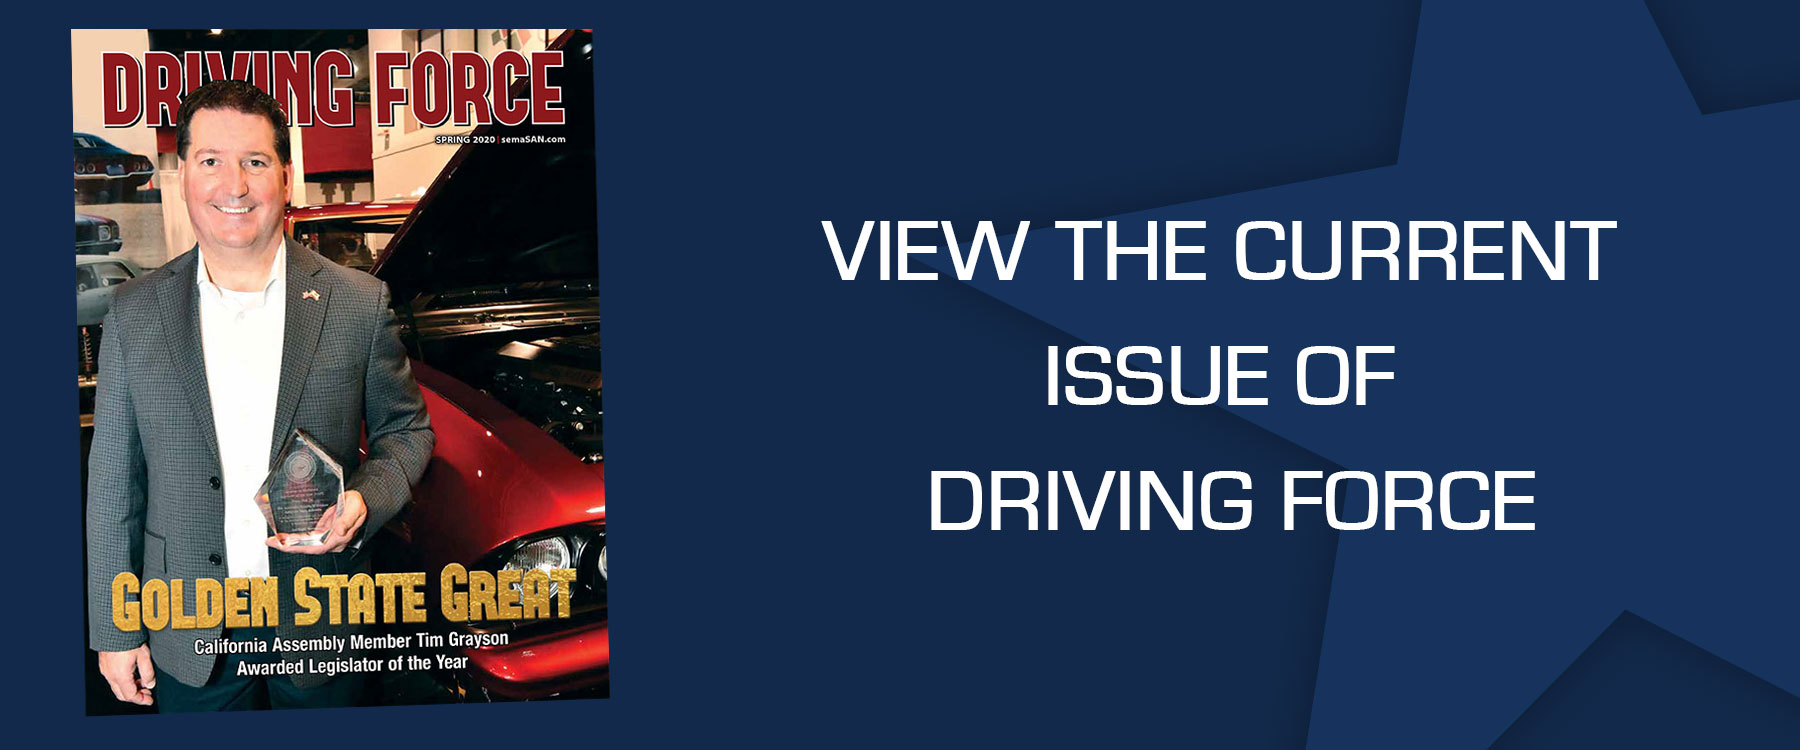 Driving Force Current Issue - Golden State Great